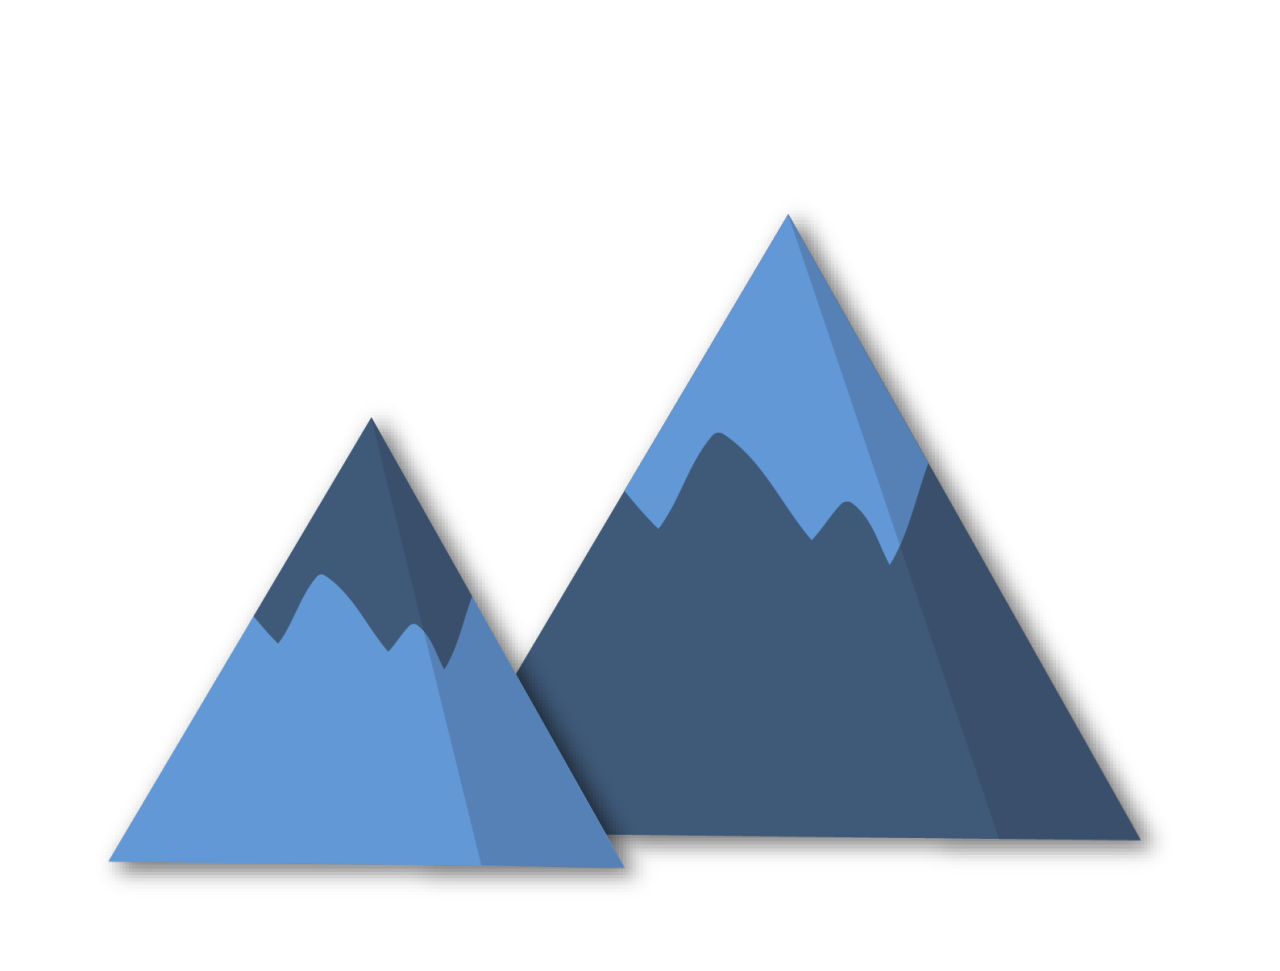 Image shows two mountains, the left is smaller and slightly in front of the other, it has a blue bottom and dark blue top. The right mountain  is larger with a dark blue bottom and blue top. The top and bottom are split jaggedly to represent snow on a mountain top.